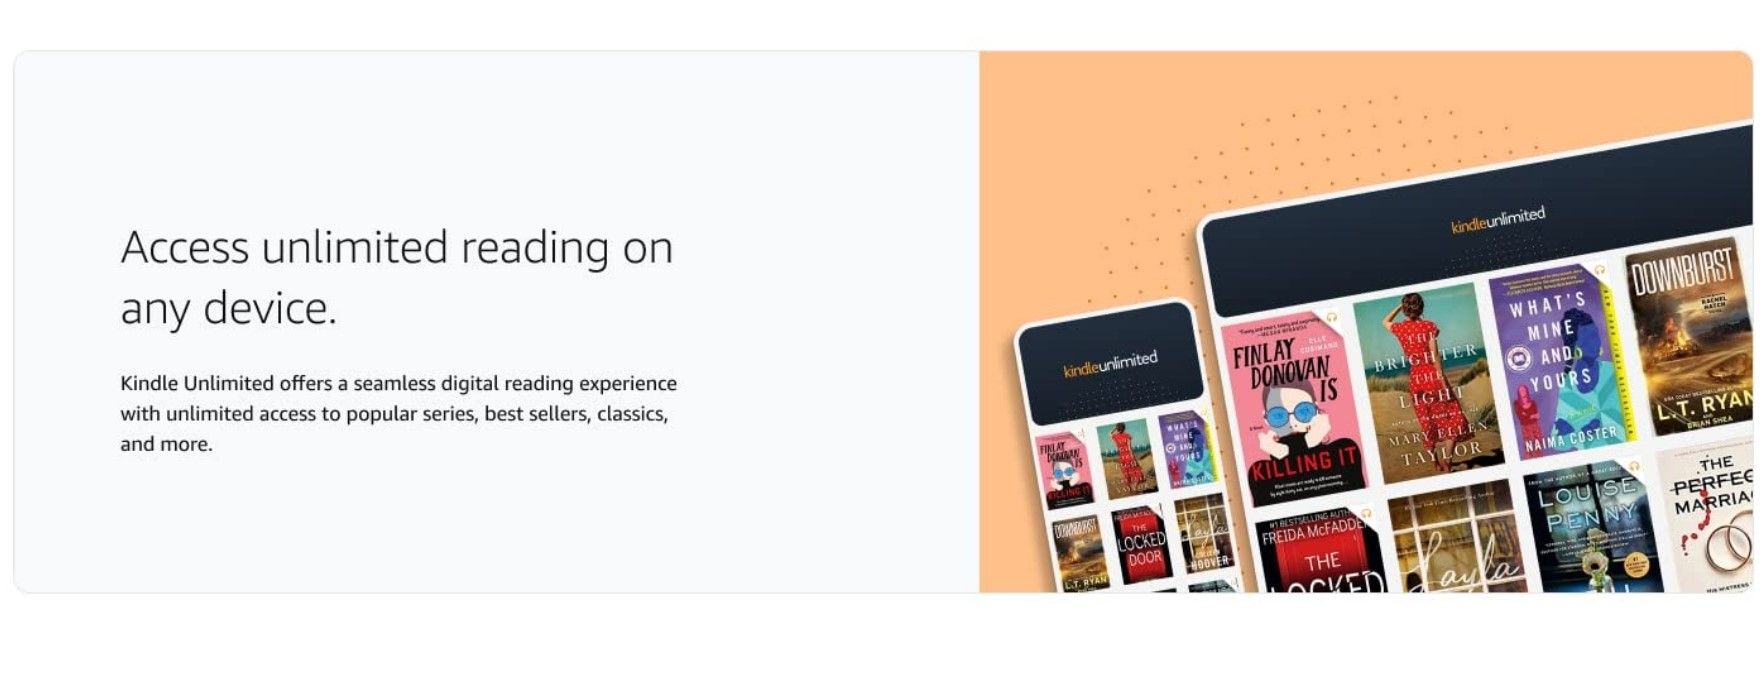 5 Reasons Why a Kindle Unlimited Subscription Isn't Worth It